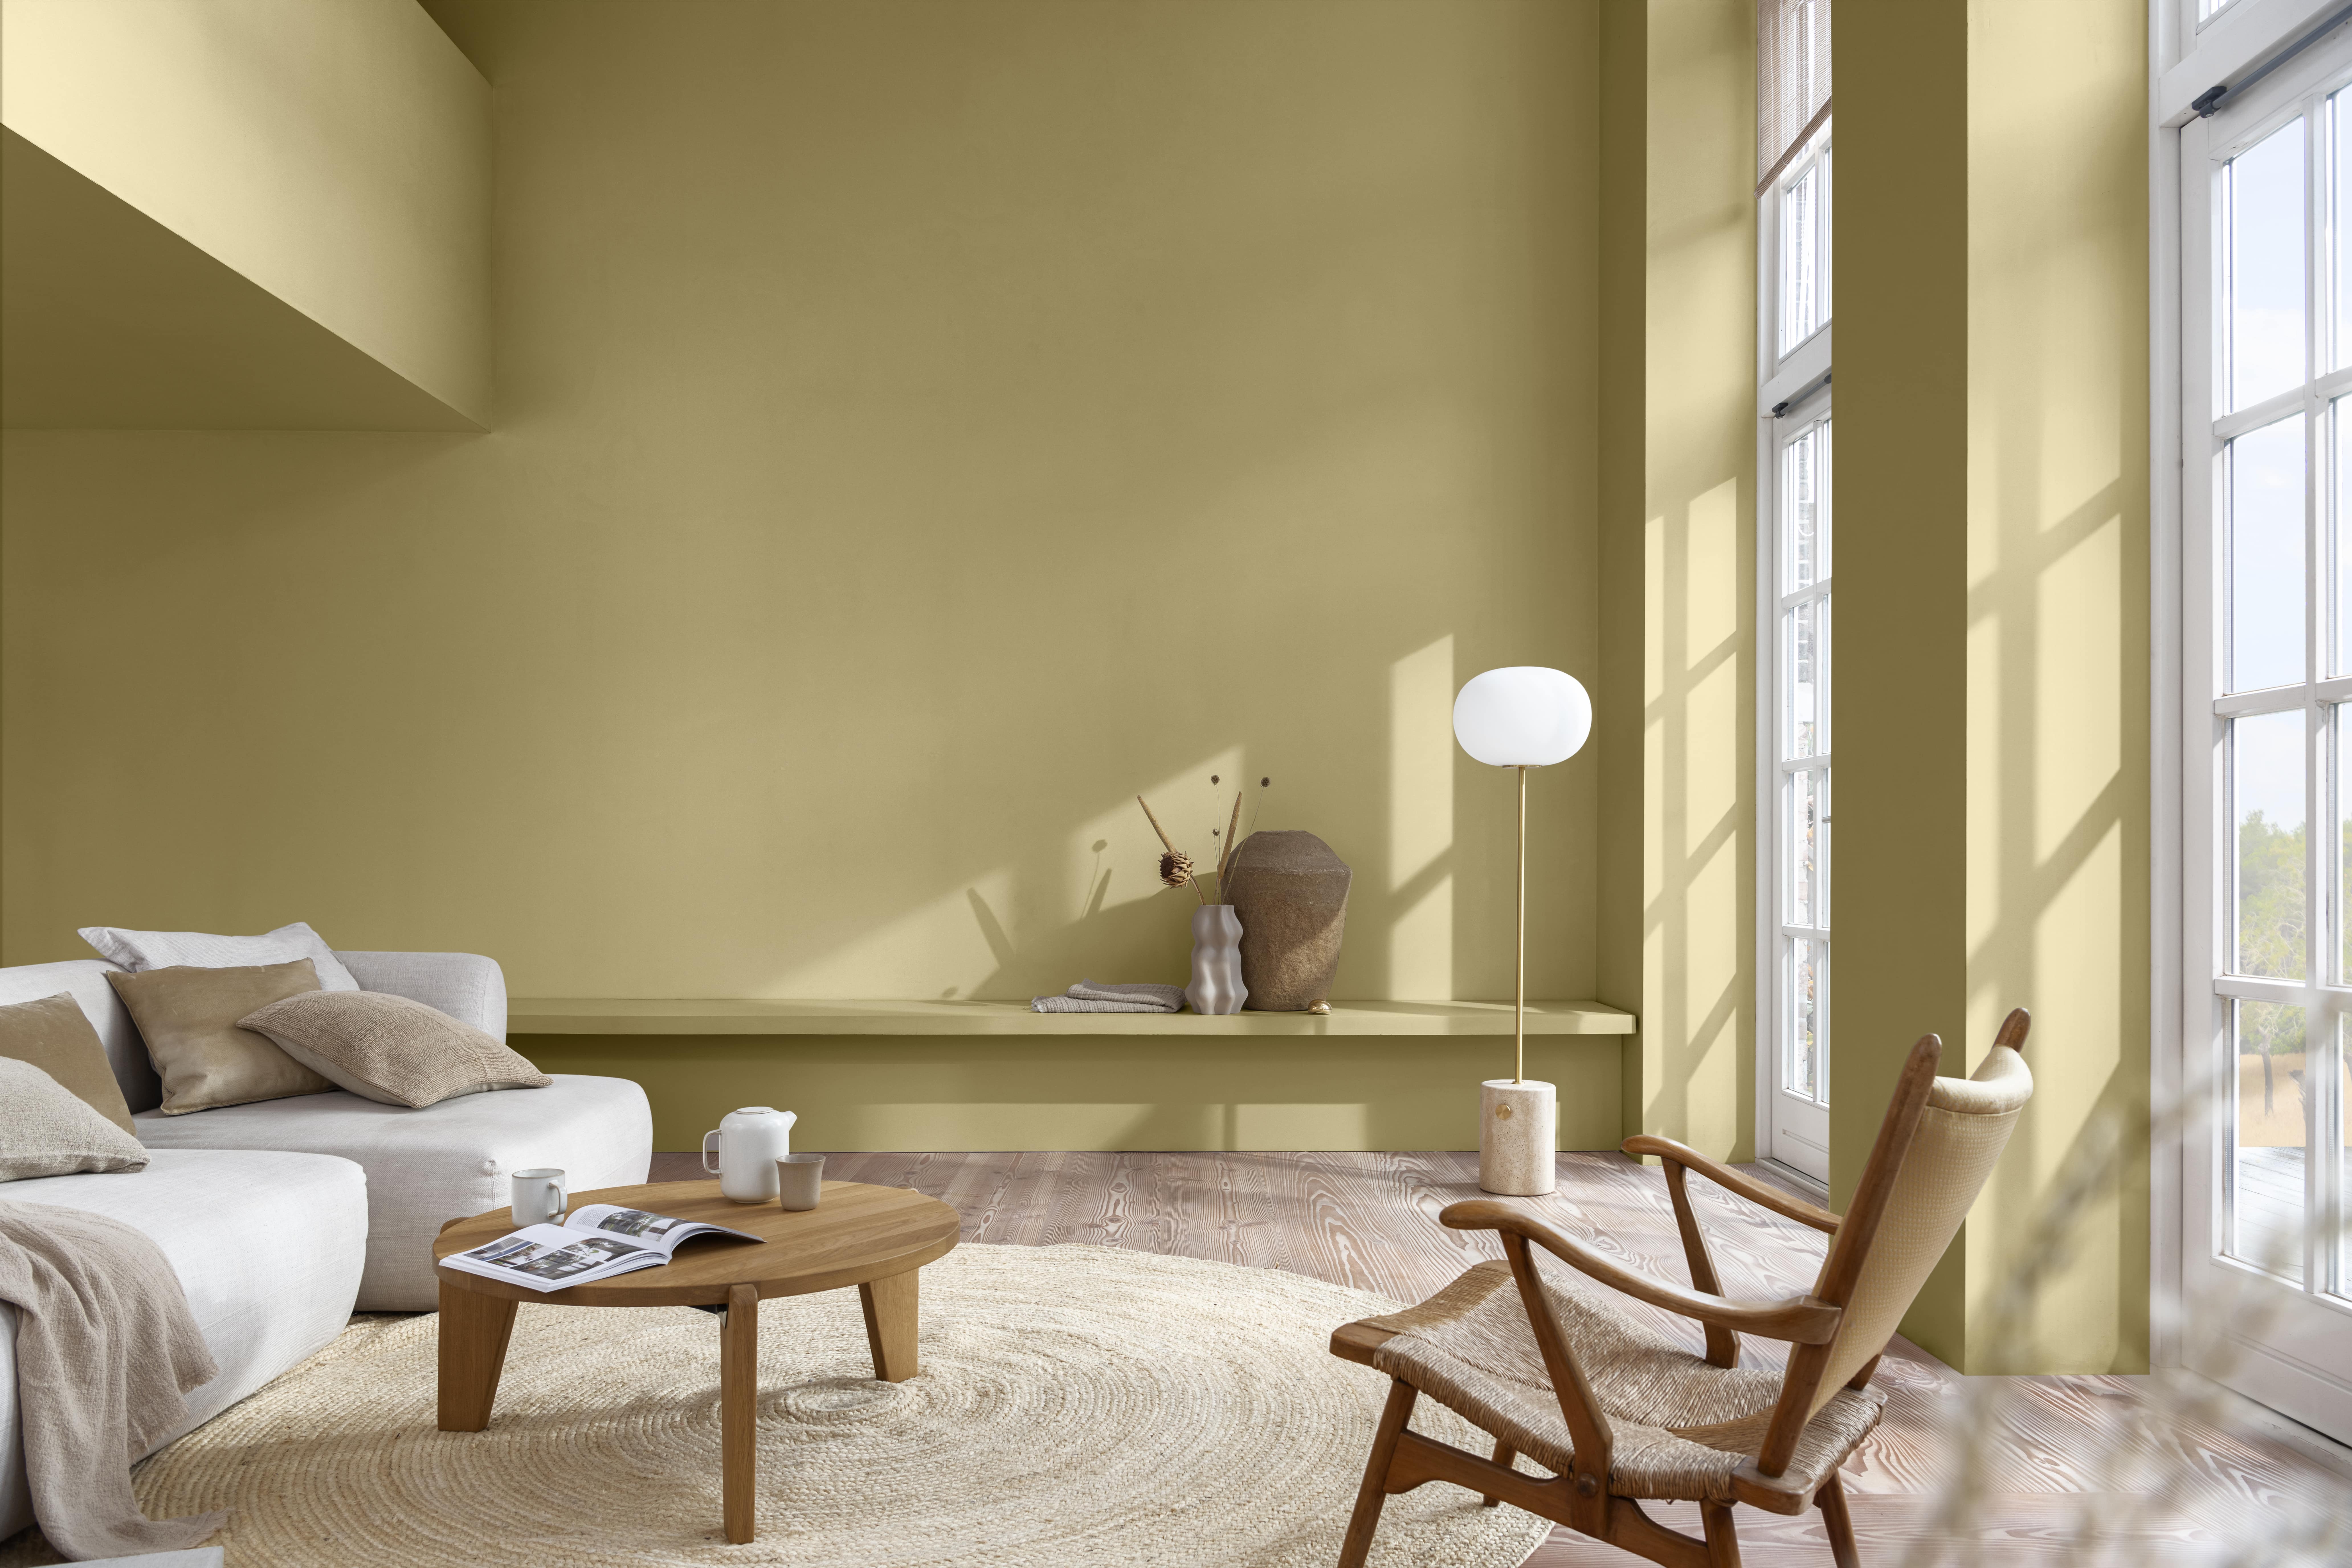 Dulux Colour of the Year Wild Wonder showcased in a spacious open plan room.